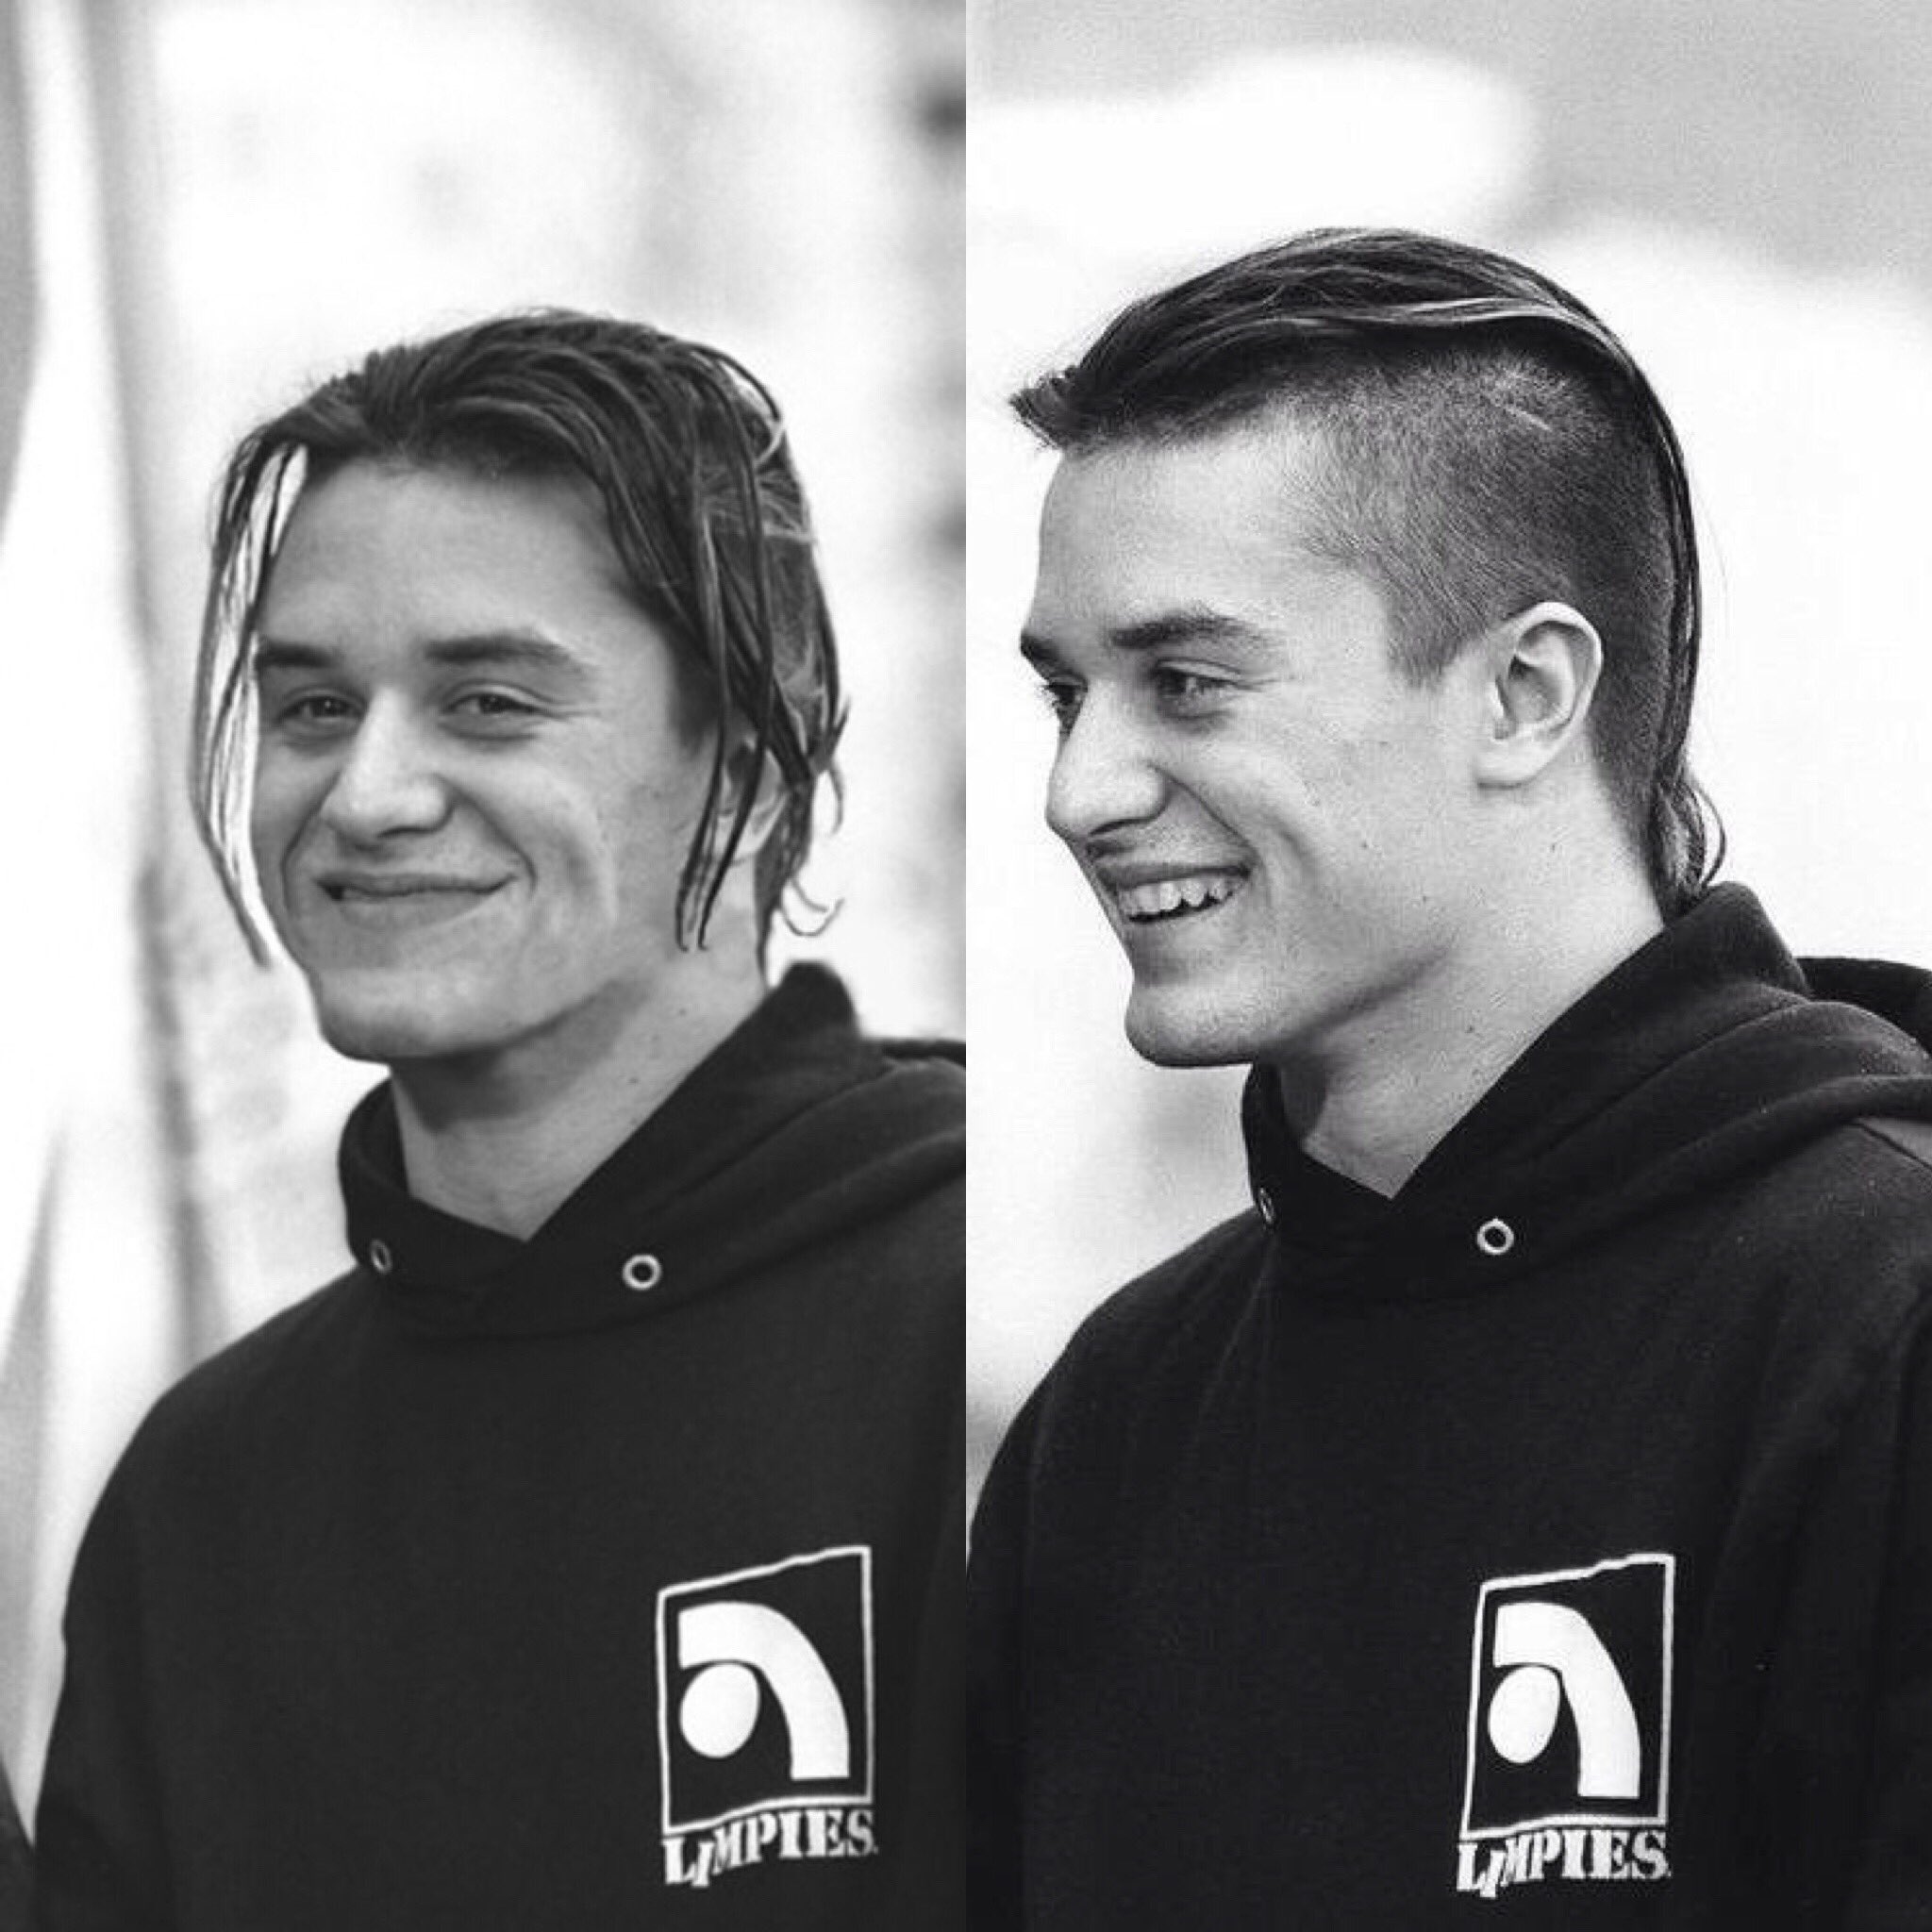  EARLY HAPPY BIRTHDAY TO MIKE PATTON BC I LOVE YOU 